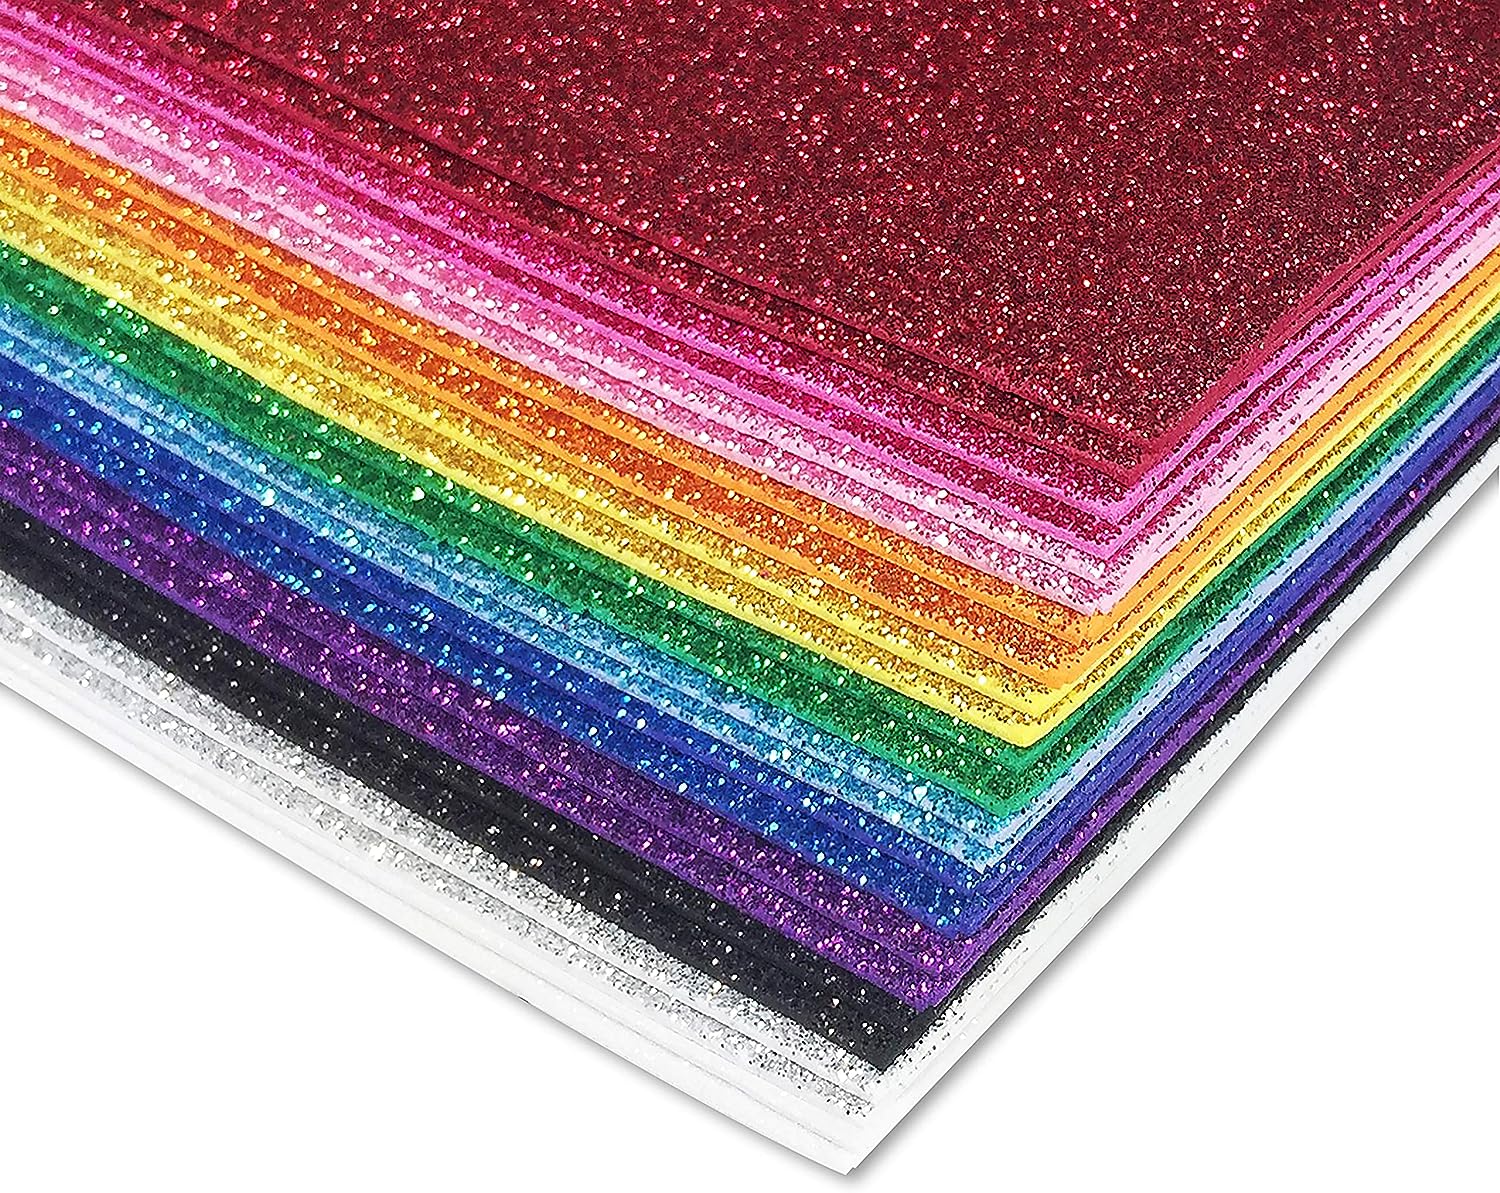 36 Pack Glitter Foam Sheets 9x12 Inch Assorted 12 Colors For Arts And Crafts 36 Sheets By PAIDU